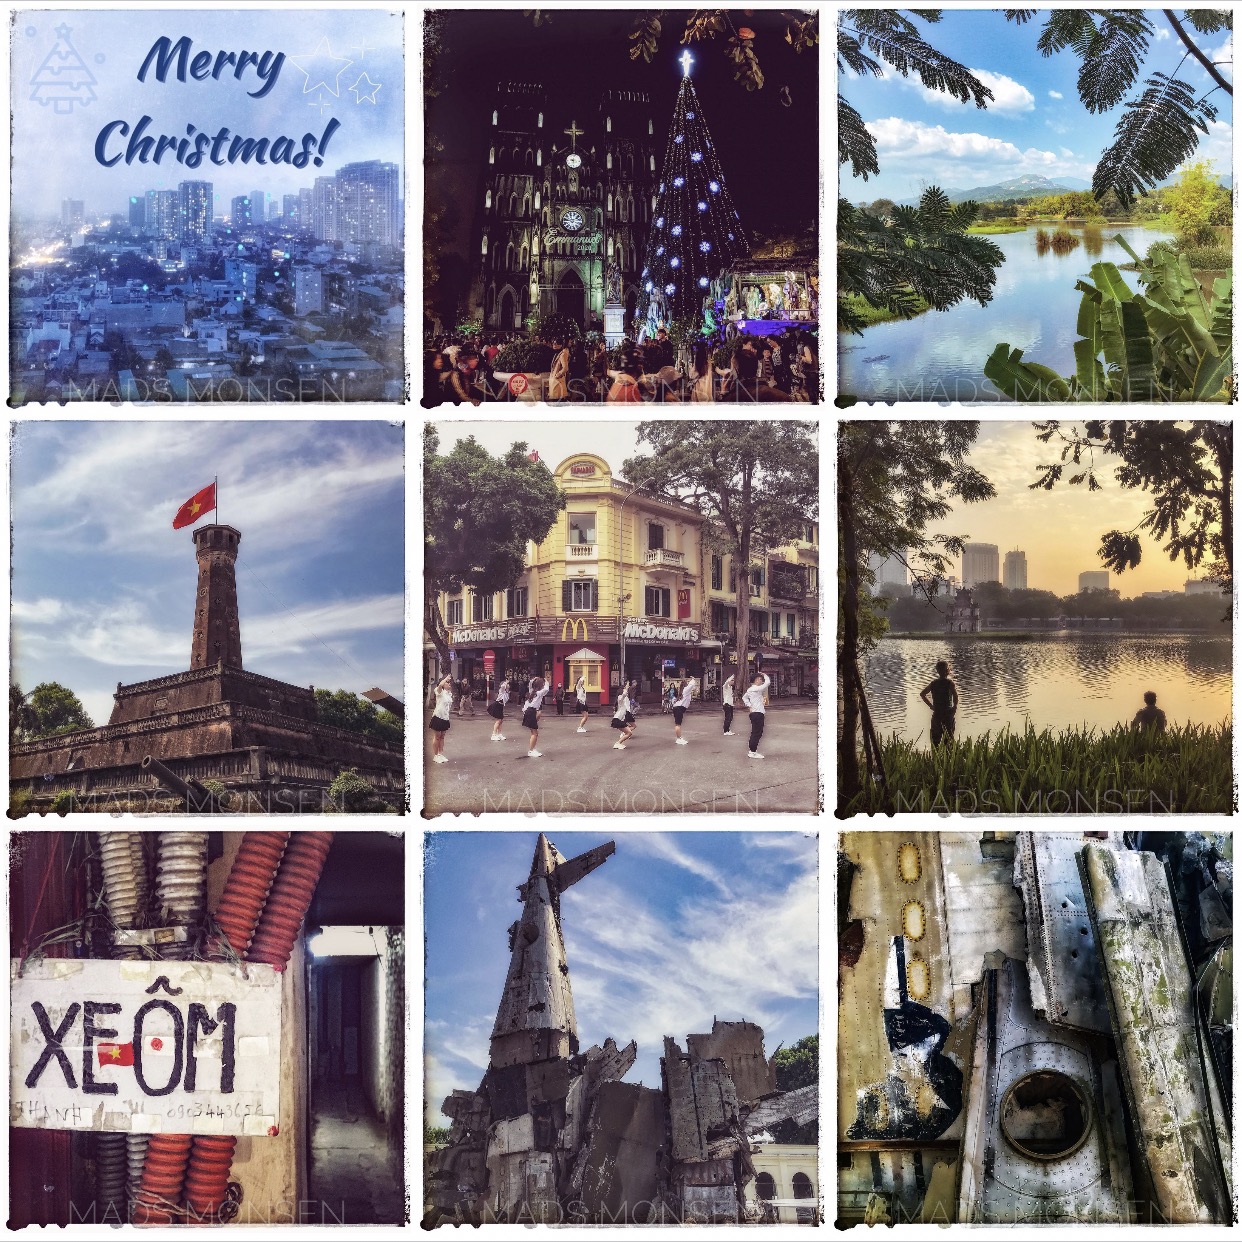 Best nine images 2020 by Mads Monsen - iphonography